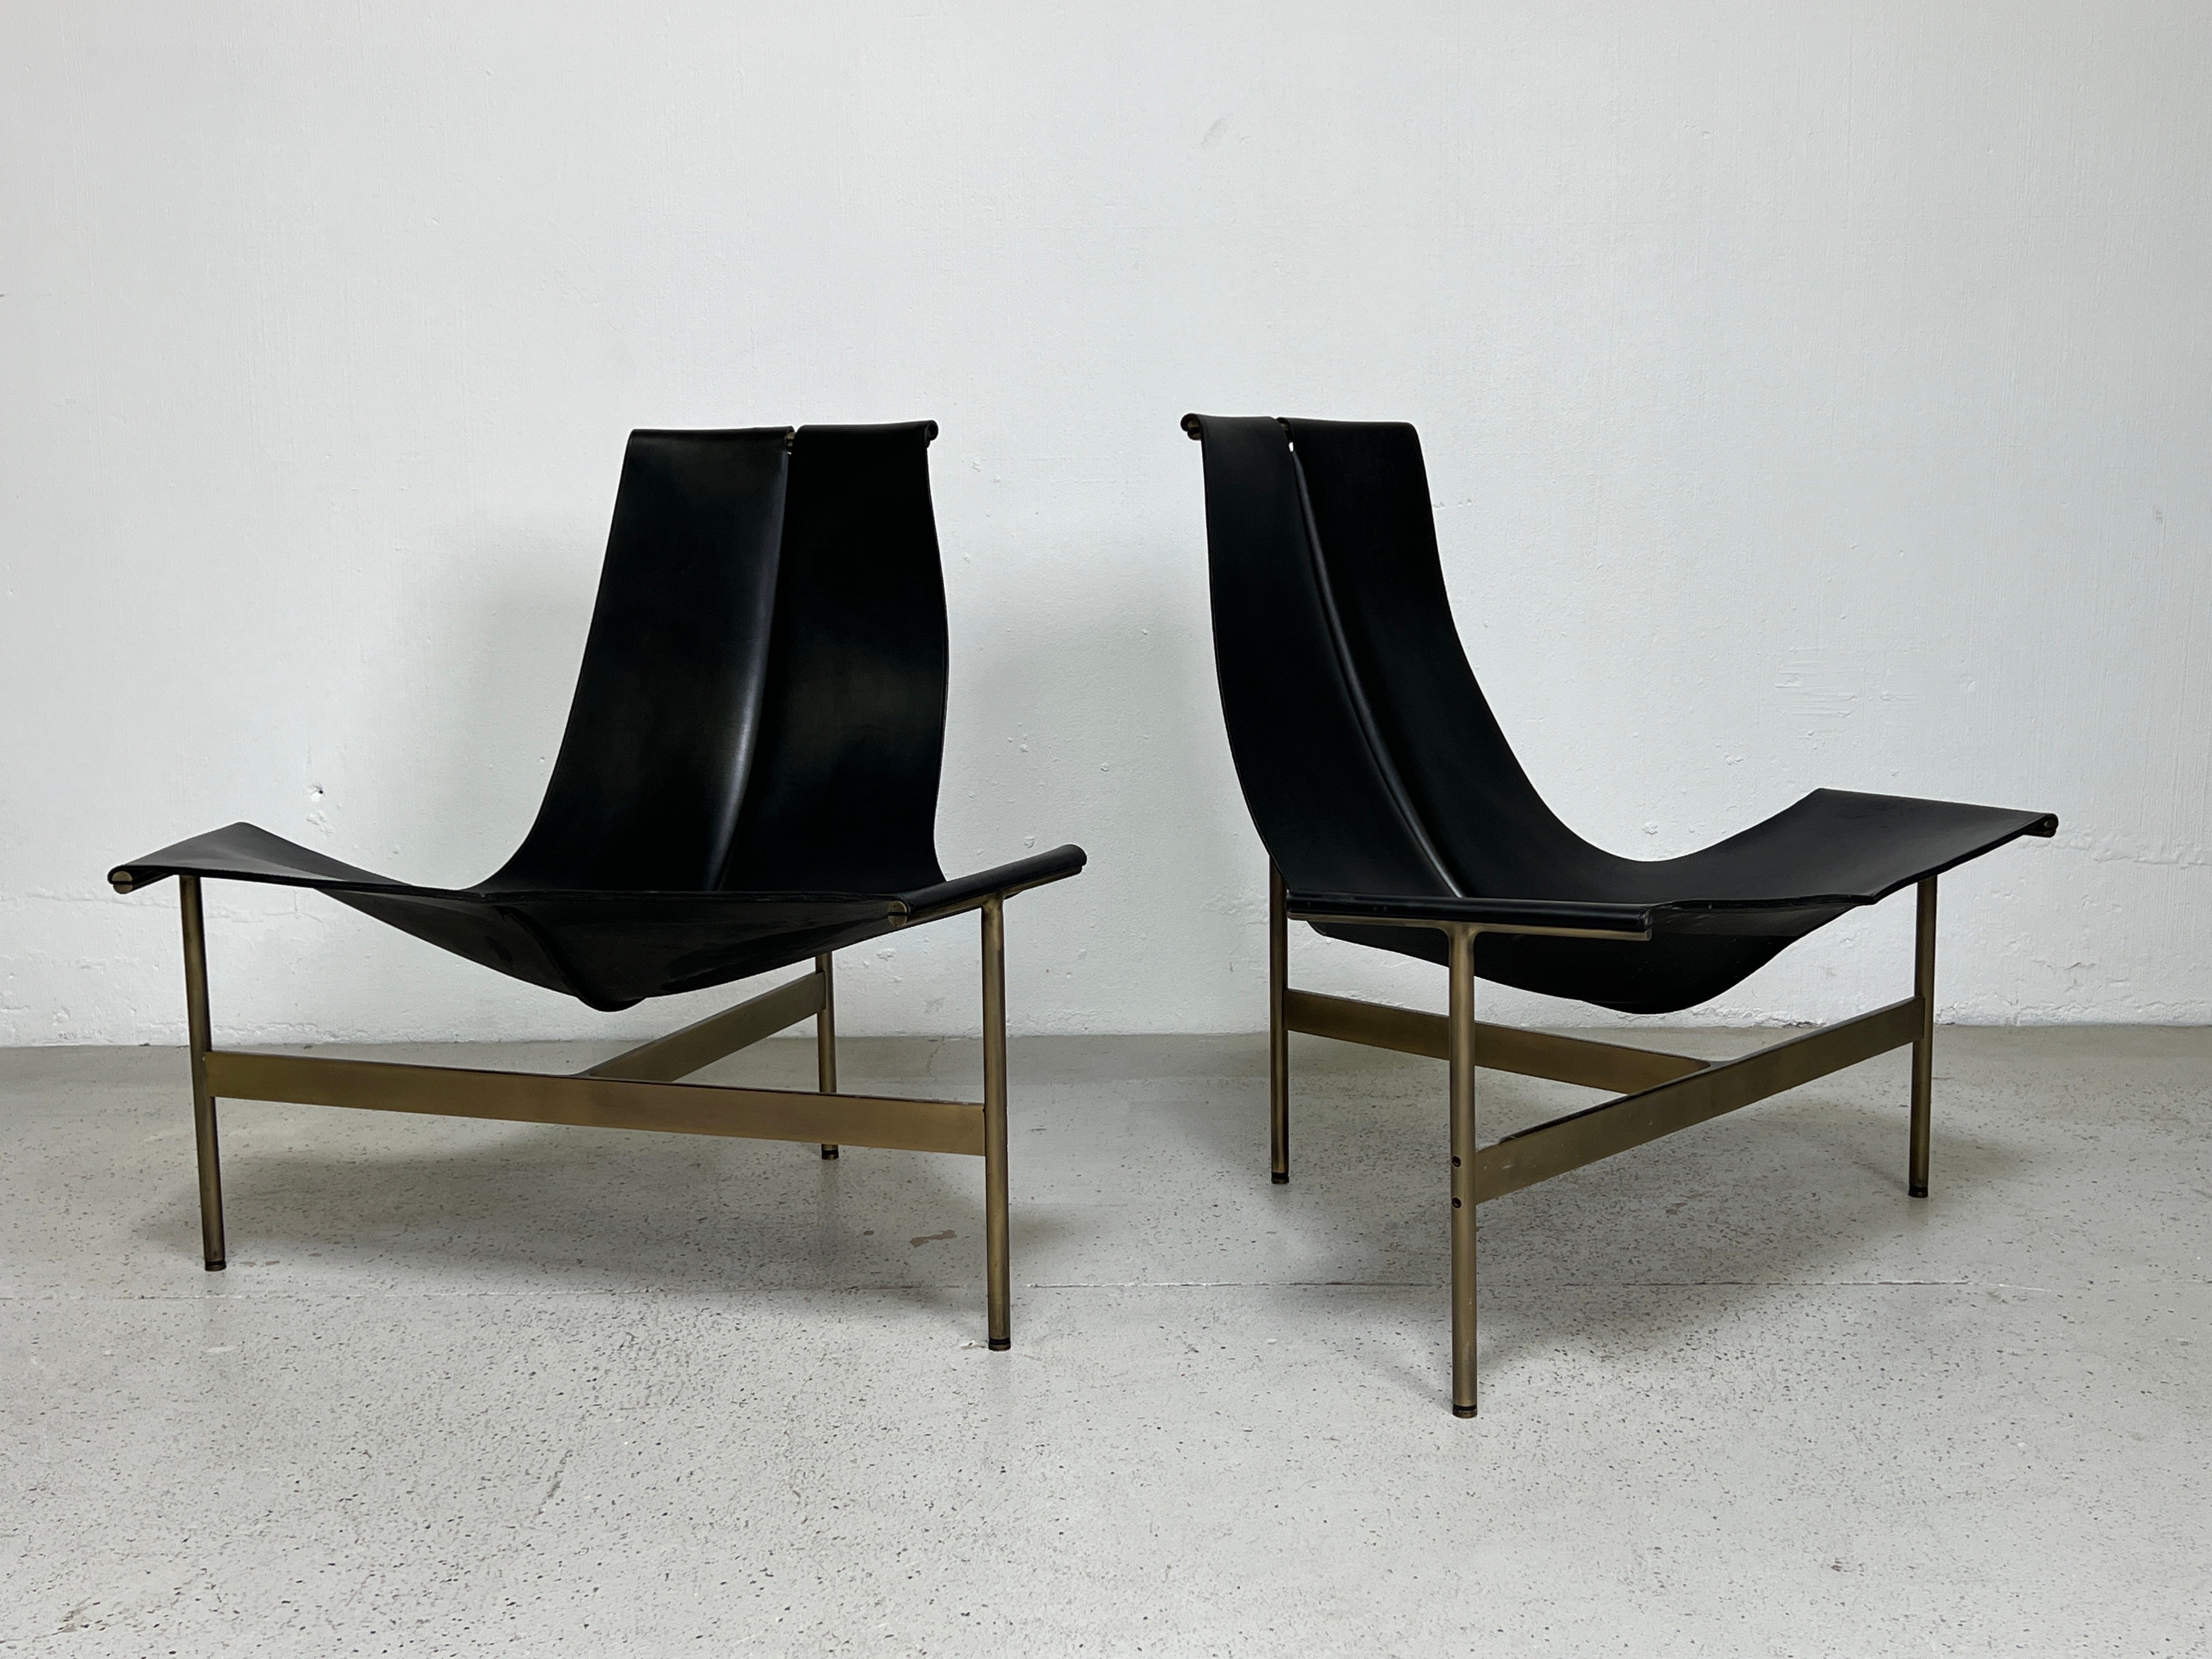 A pair of TG-15 lounge chairs with Bridle saddle leather slings and solid bronze frames. Designed by William Katavolos, Ross Littell and Douglas Kelley in 1952 as part of the original Laverne Collection produced by Gratz Industries.